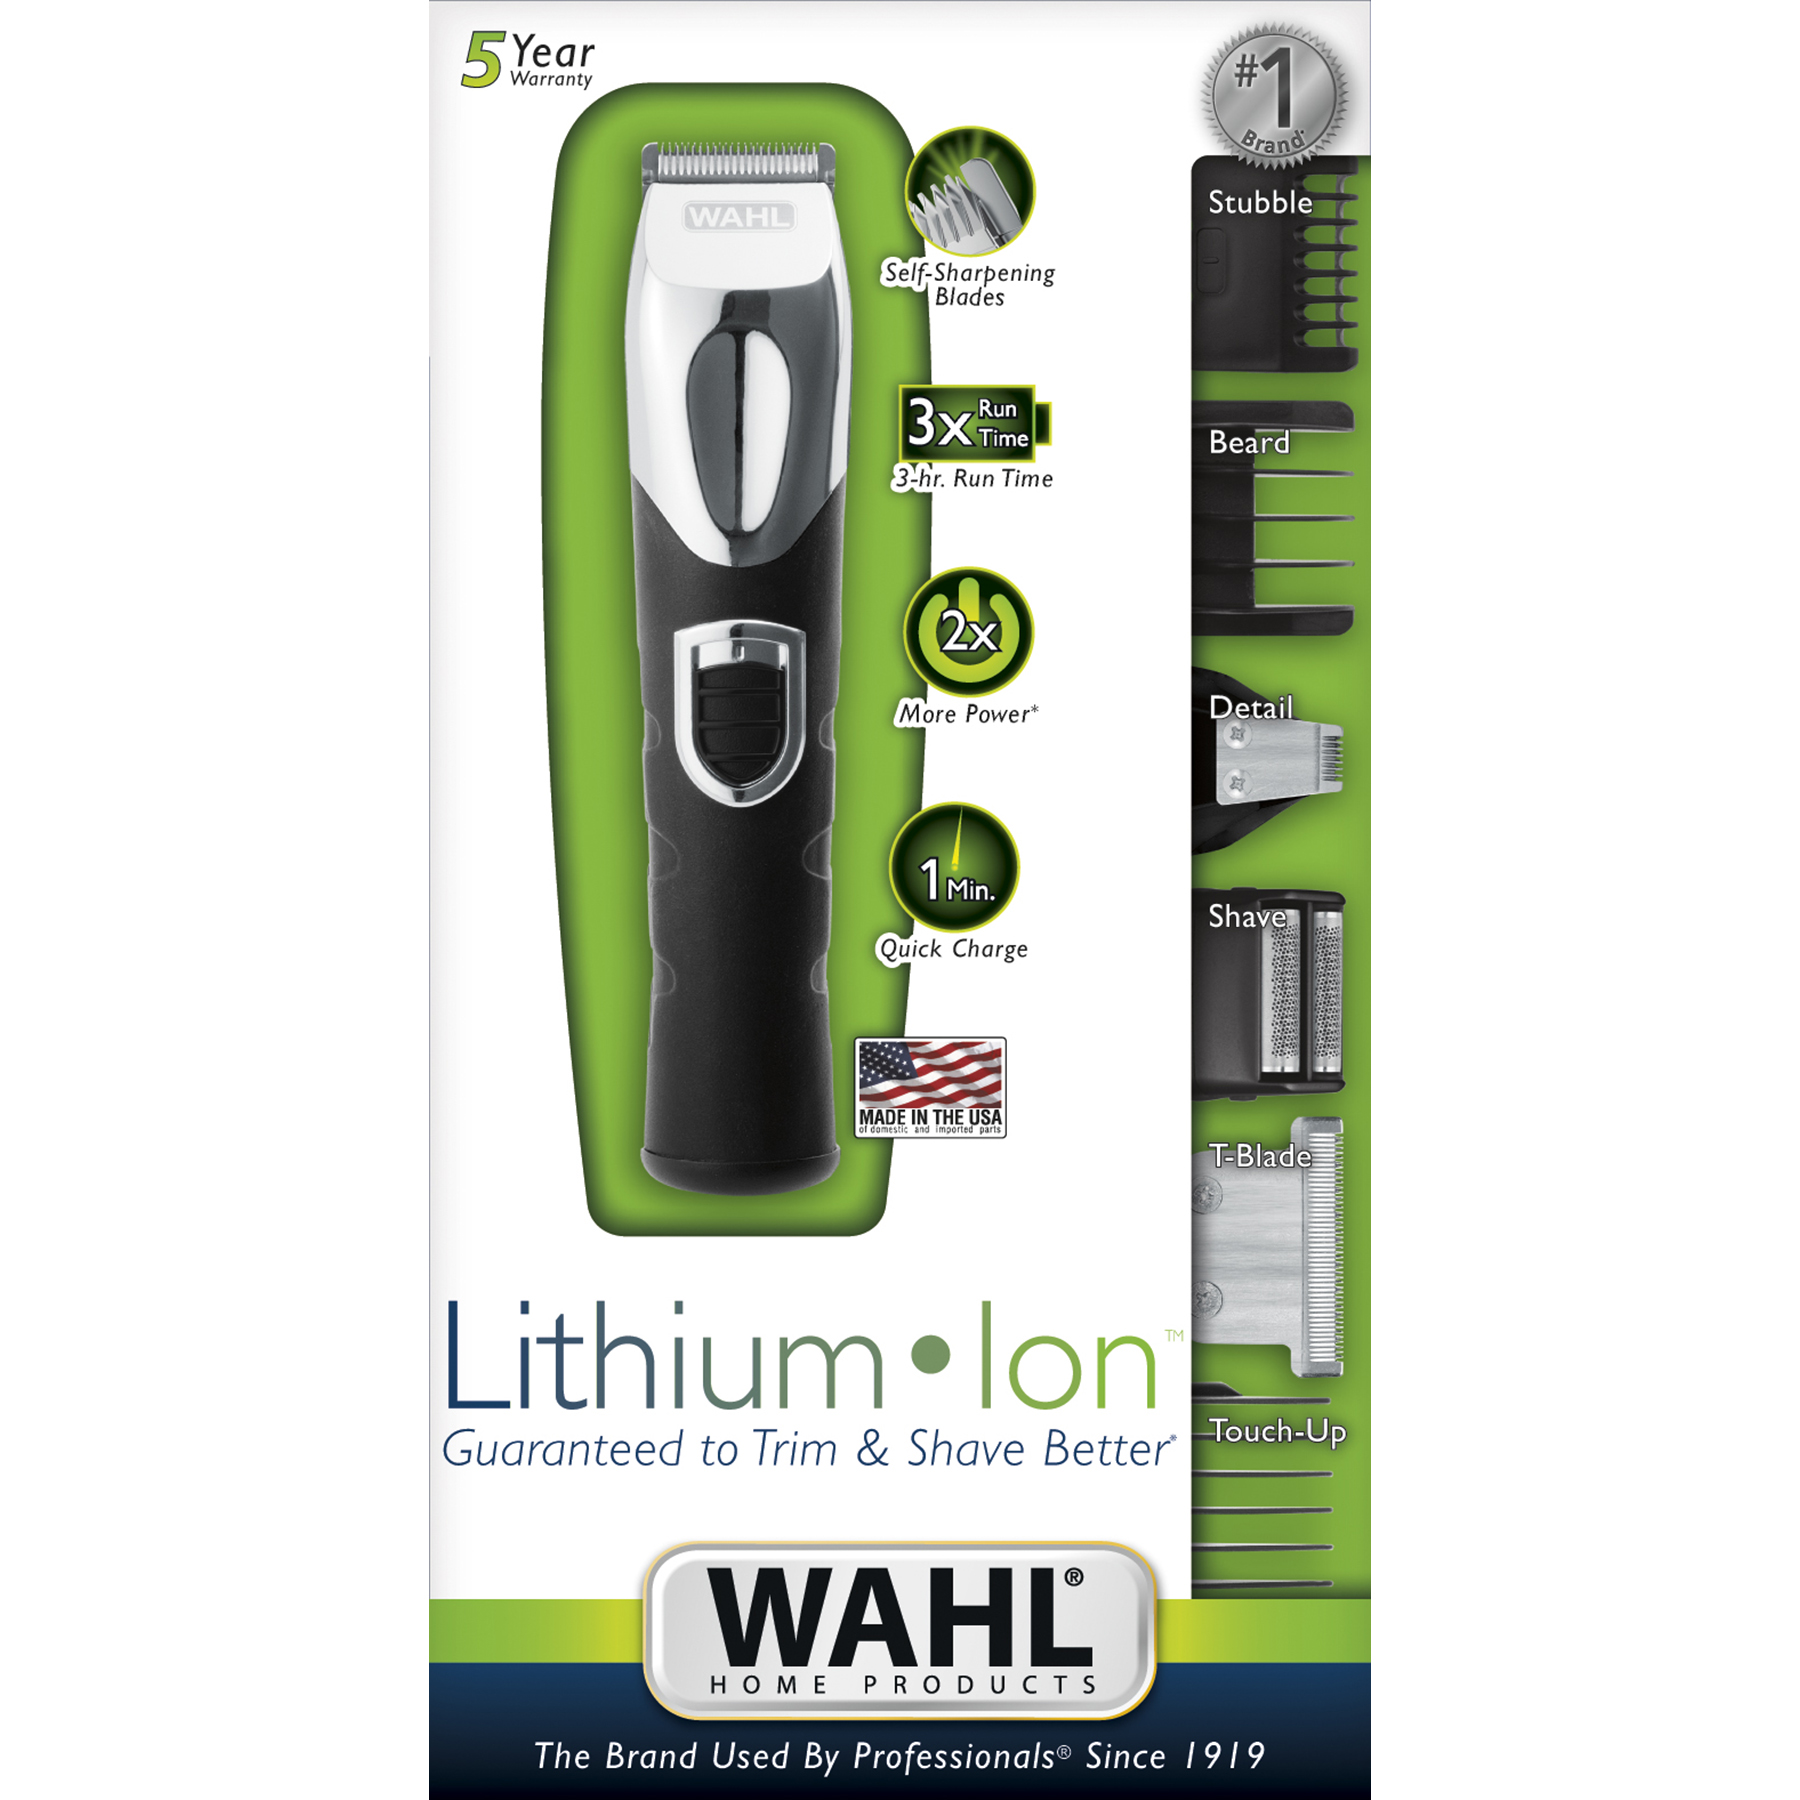 wahl rechargeable trimmer all in one